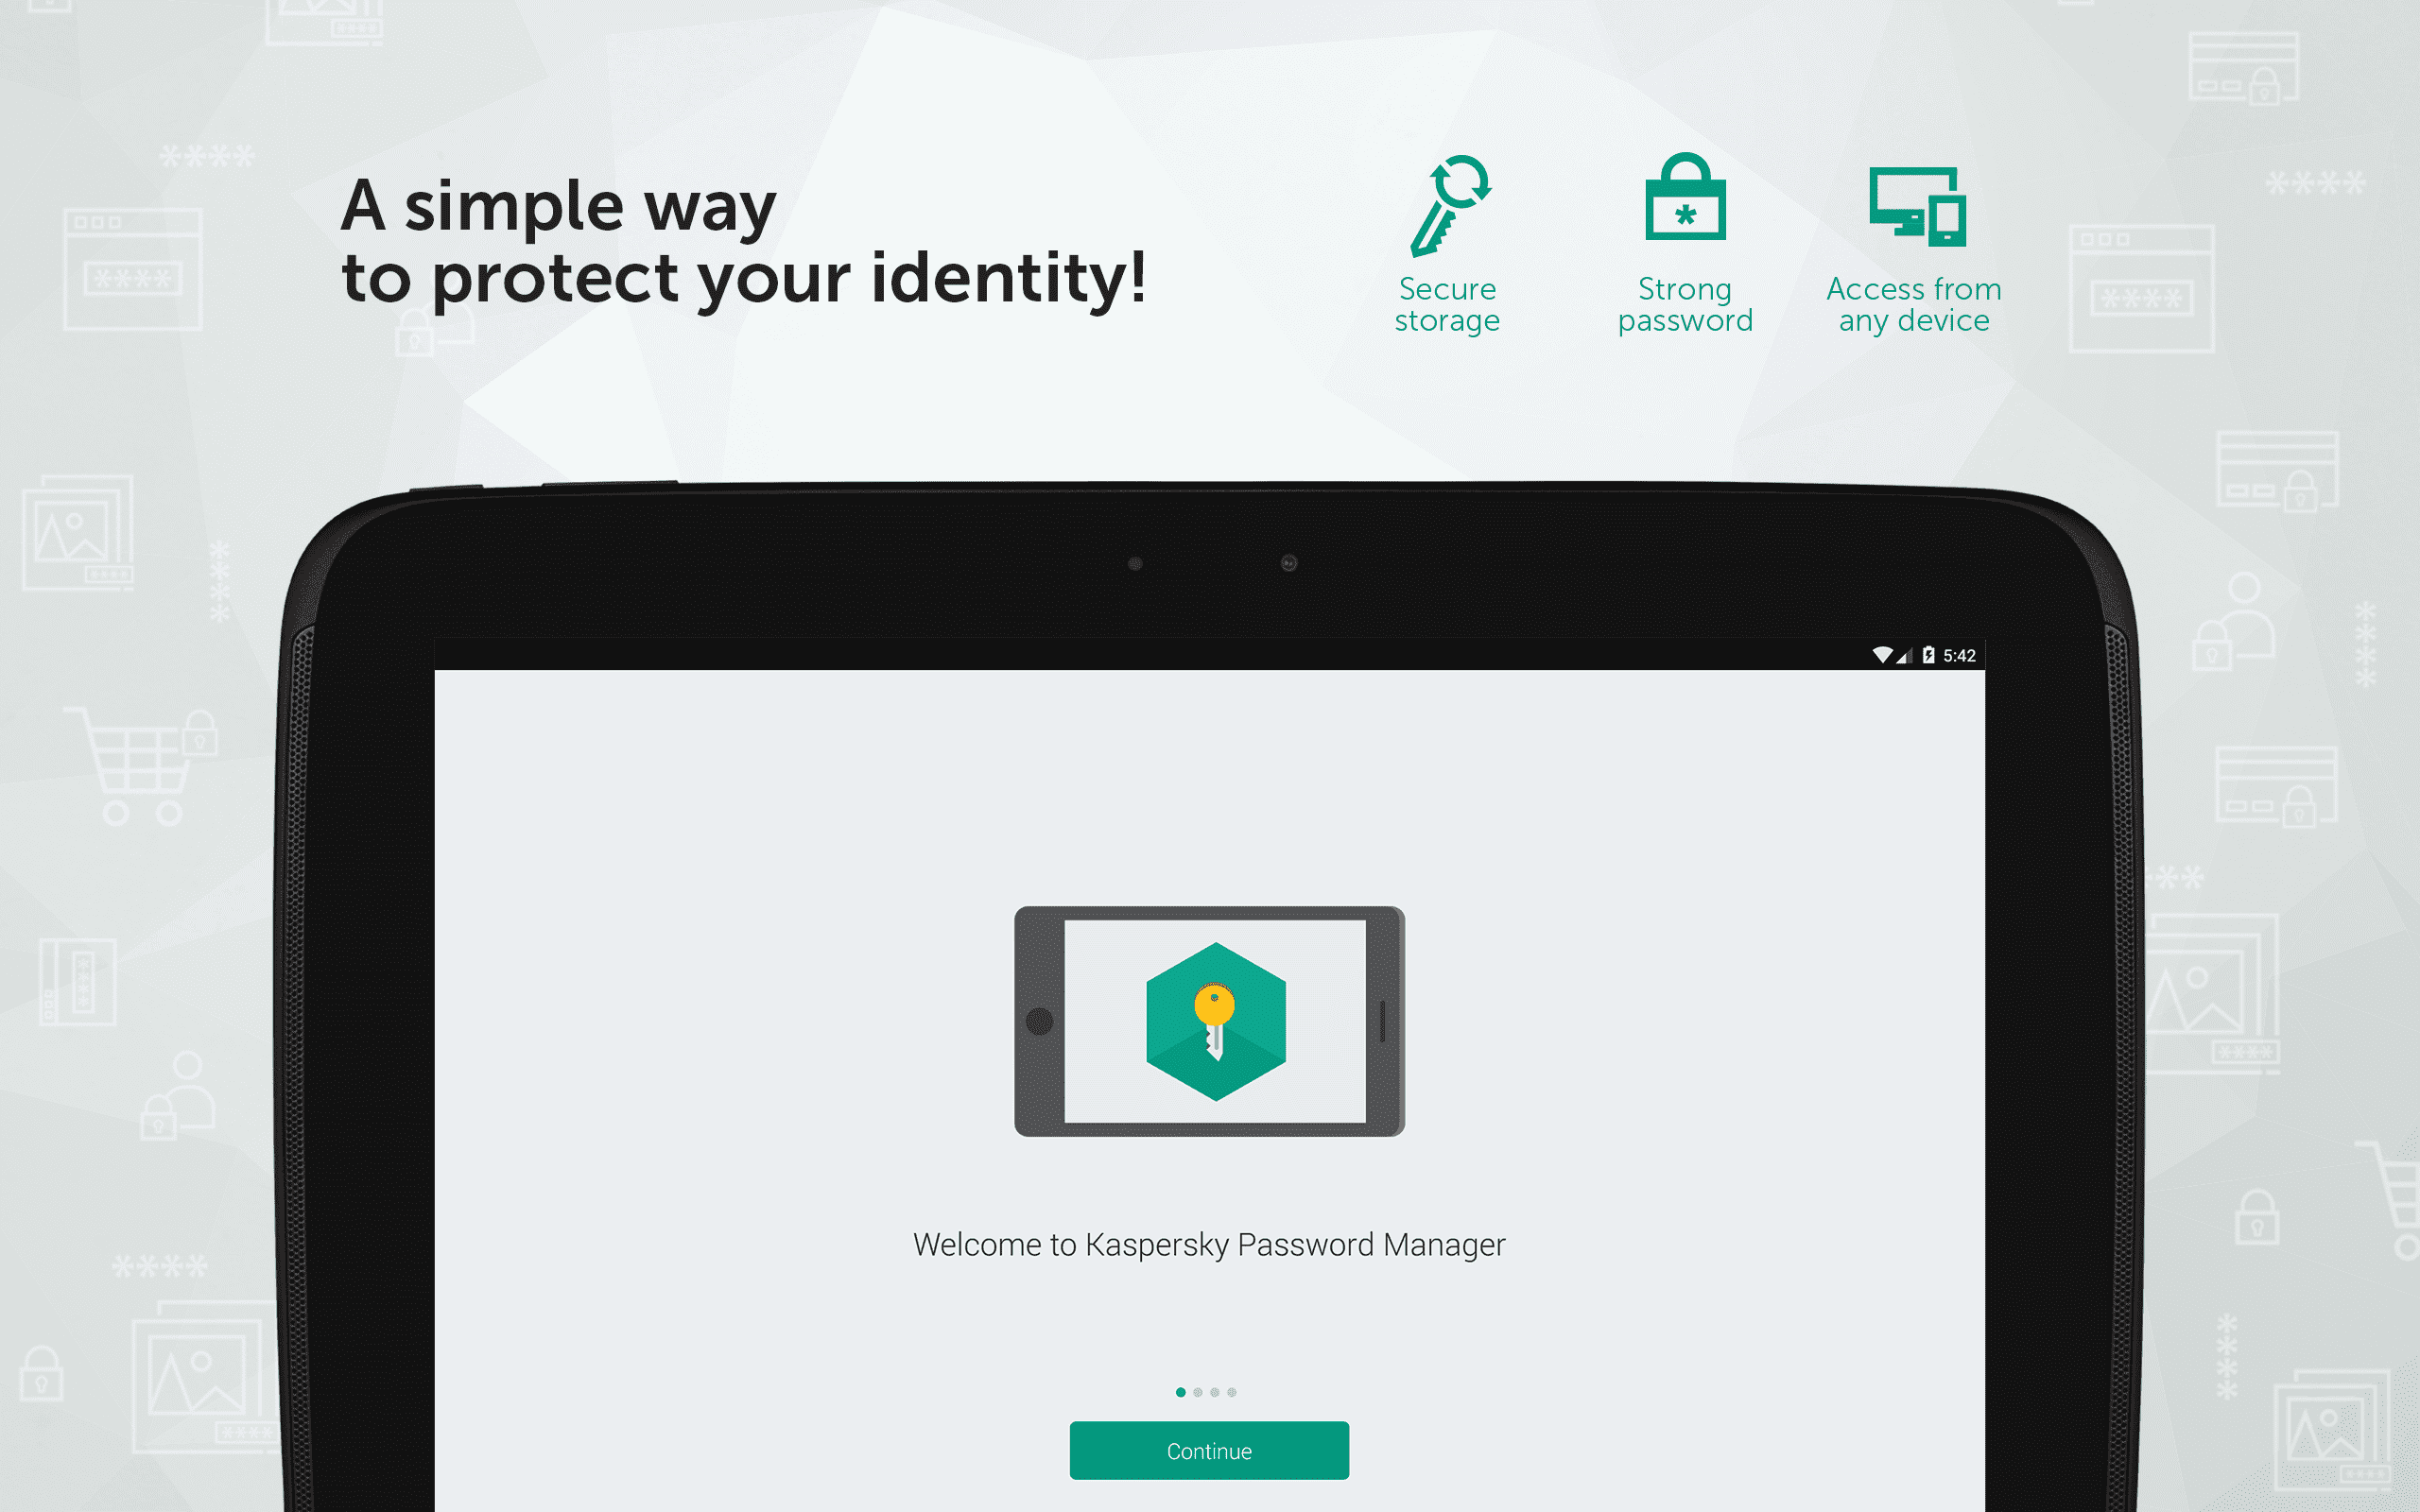 Manage your passwords - protect your identity